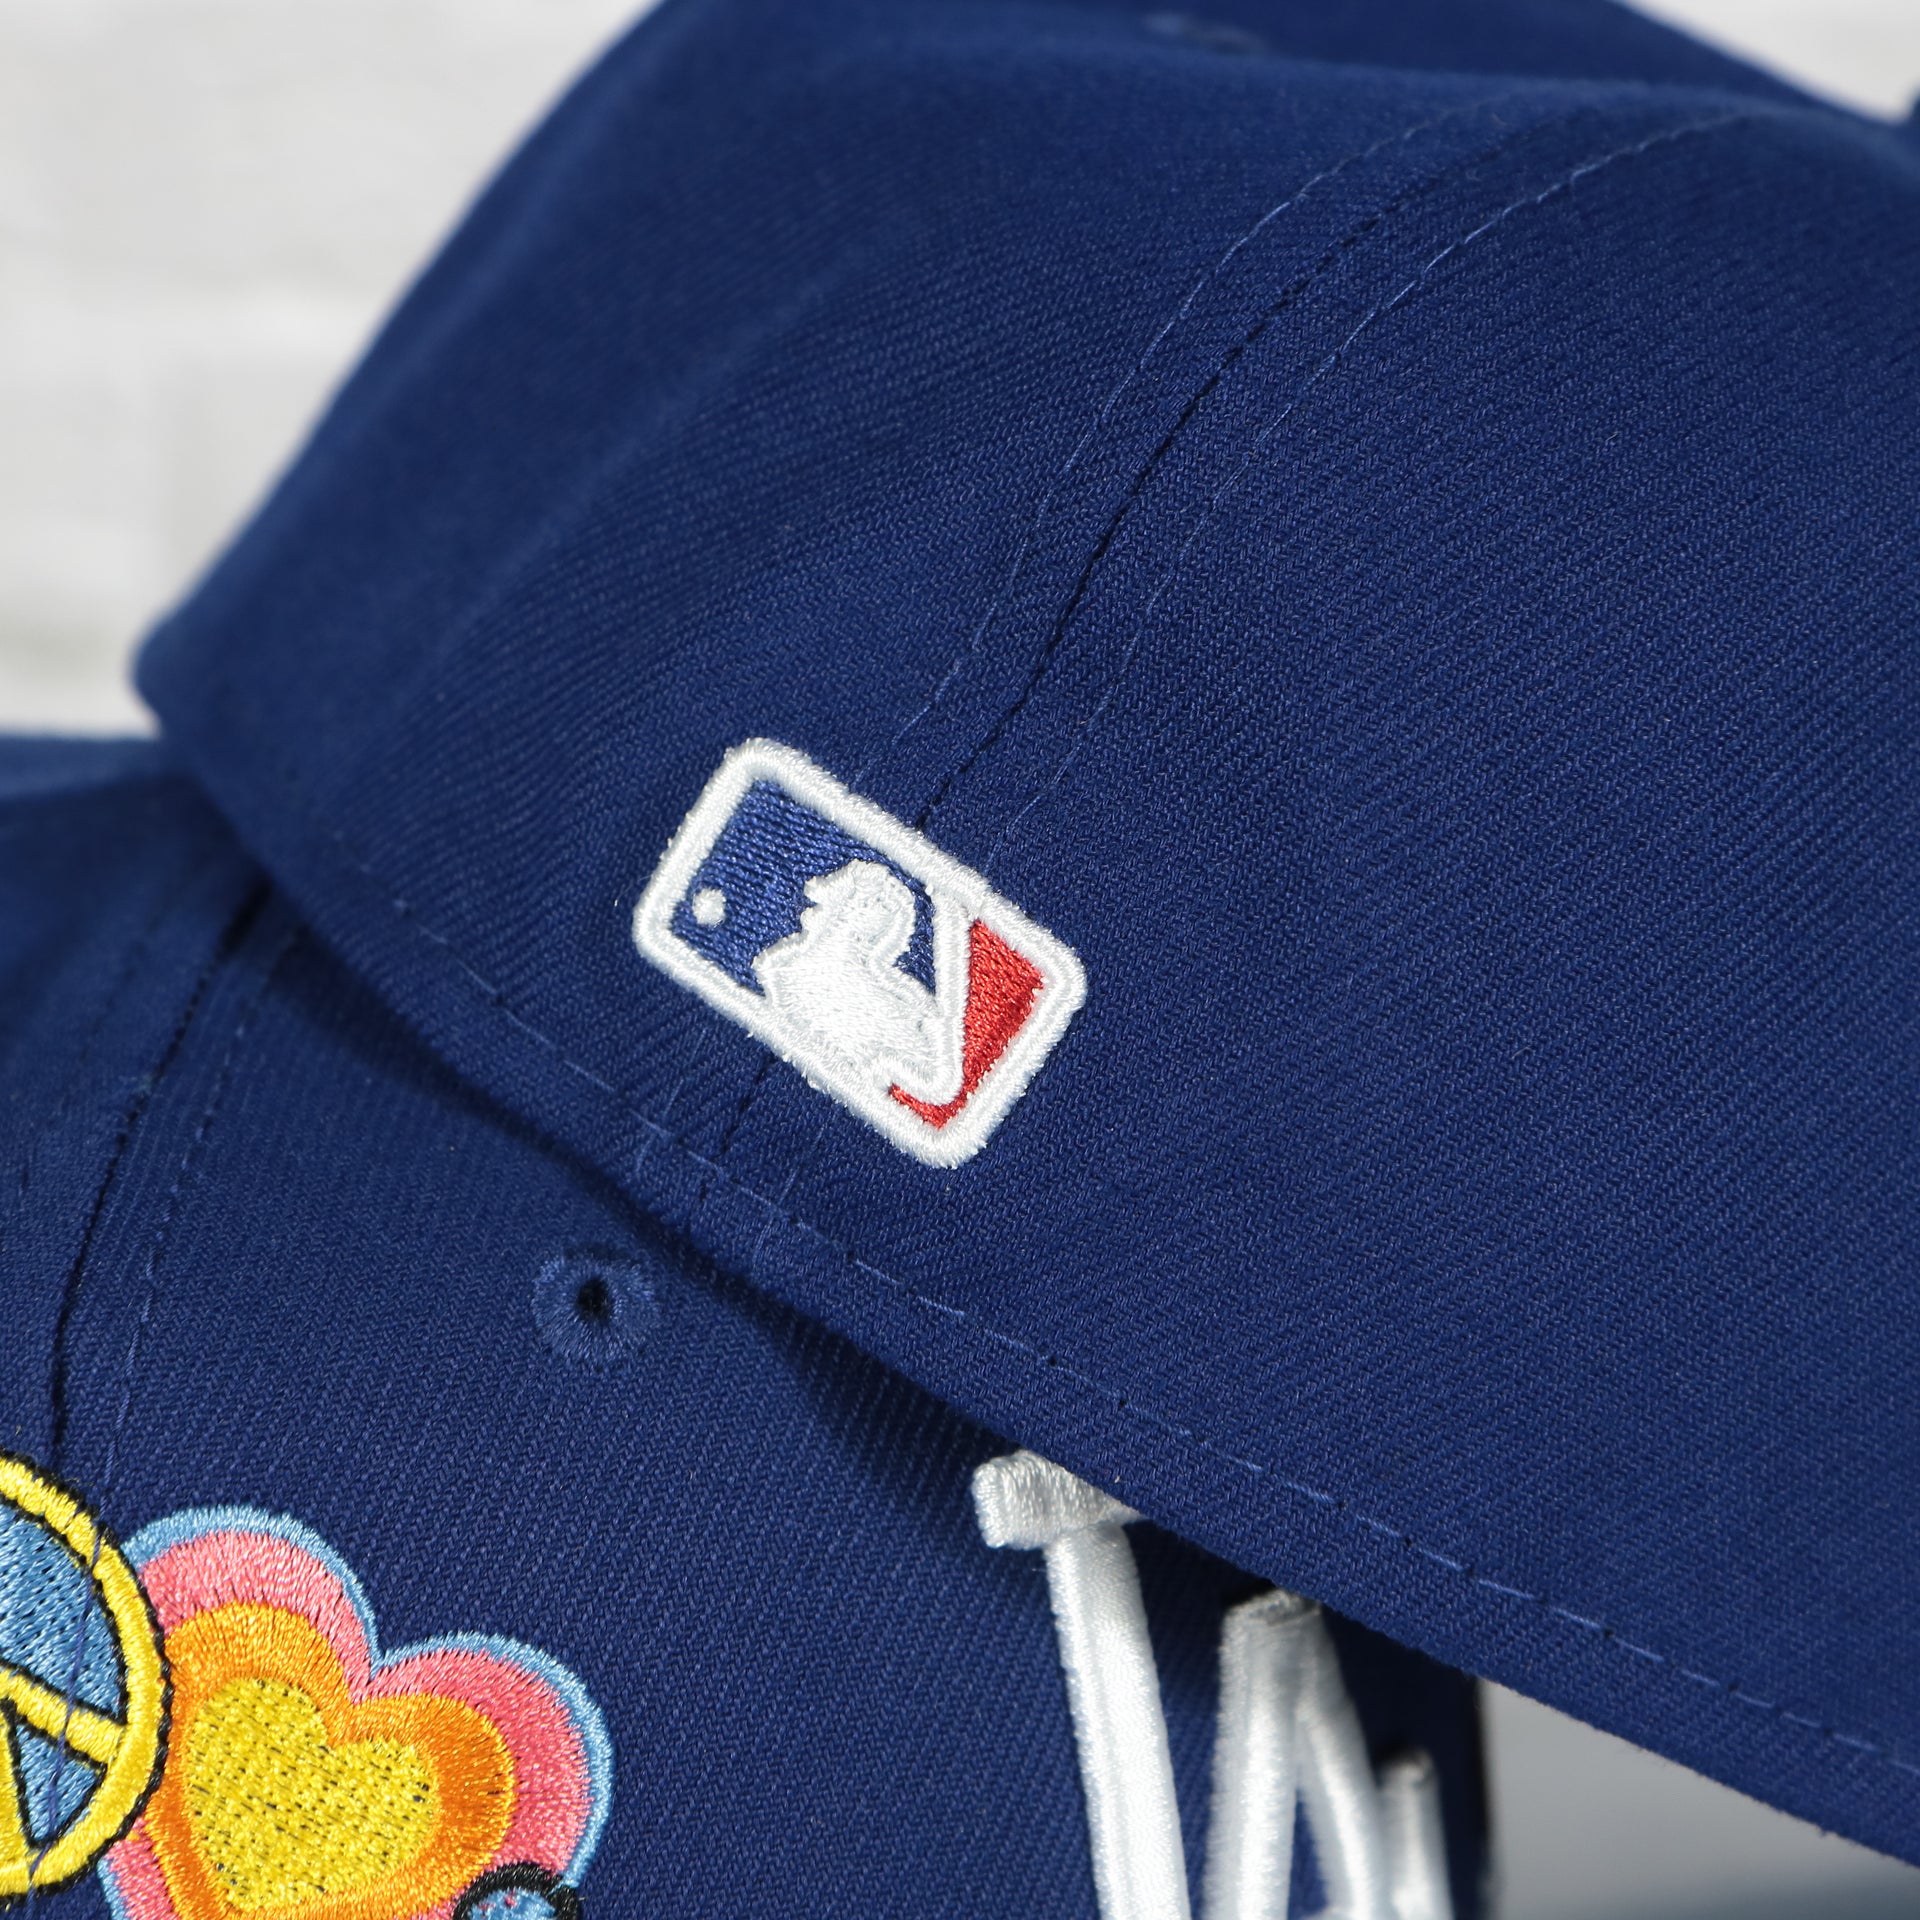 MLB batterman logo on the Los Angeles Dodgers Groovy World Series Champions Patch 59Fifty Fitted Cap | New Era Groovy Side Patch 5950